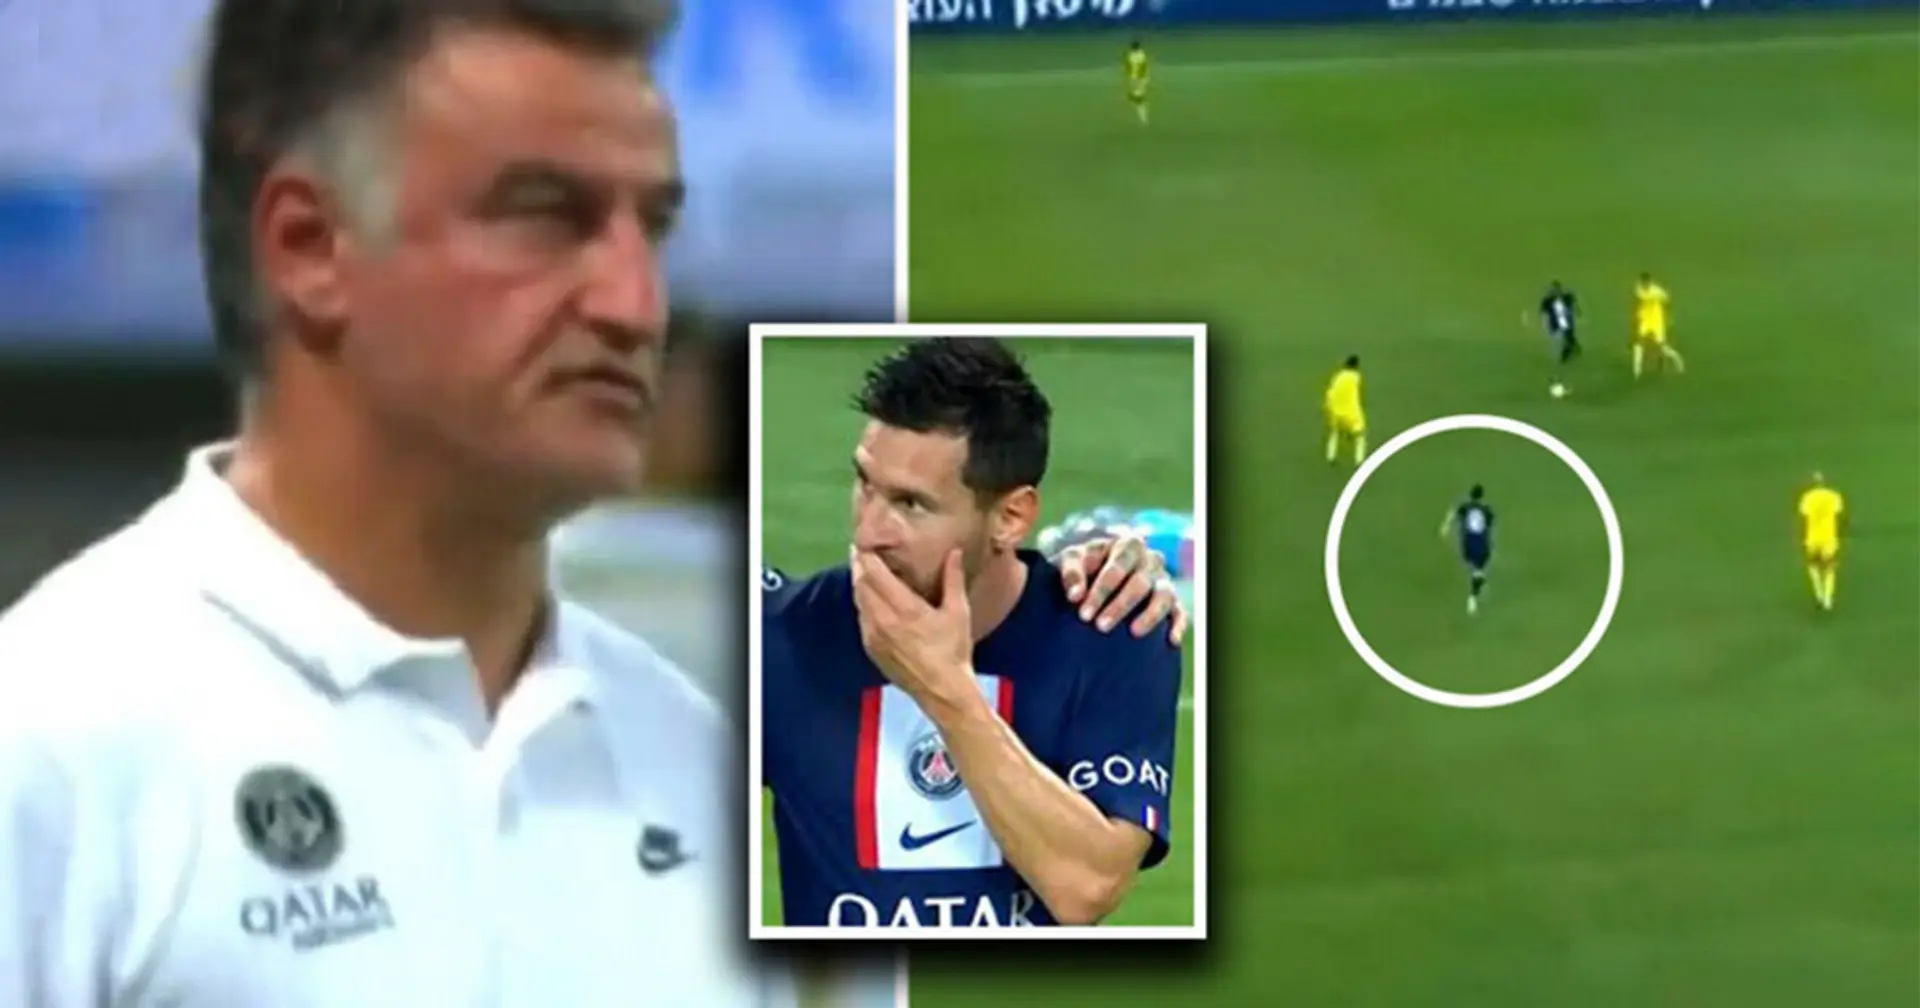 New PSG boss shouts at Messi three times to urge him to press opponent – what happened next